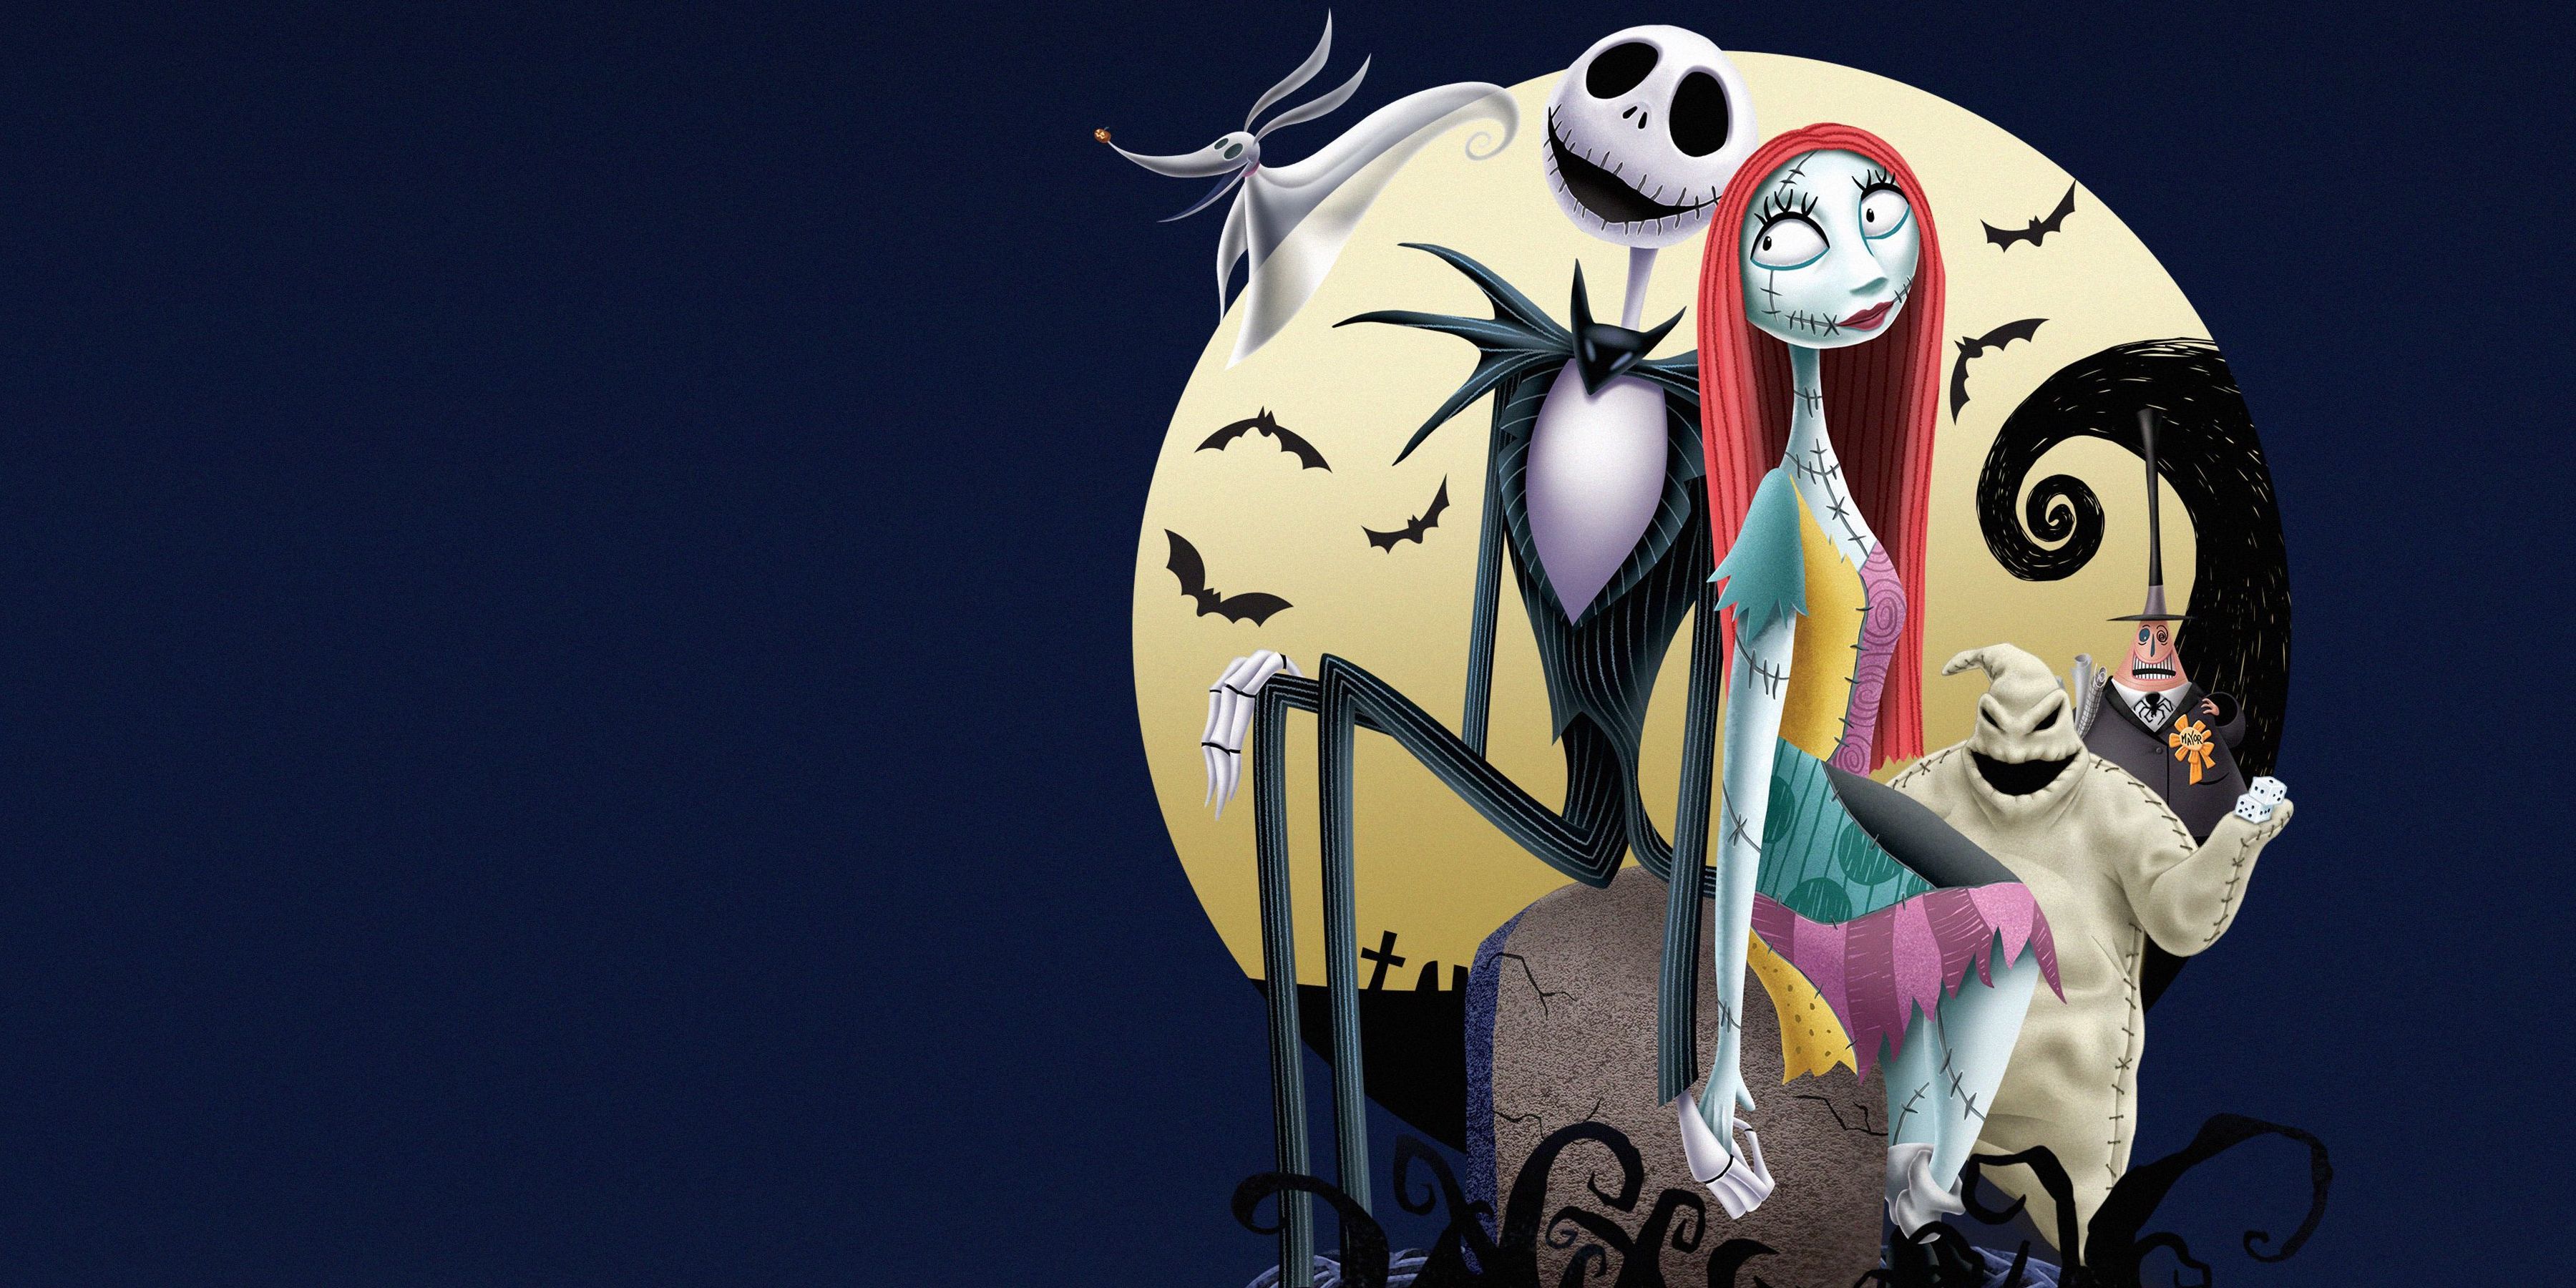 The promo image from The Nightmare Before Christmas.